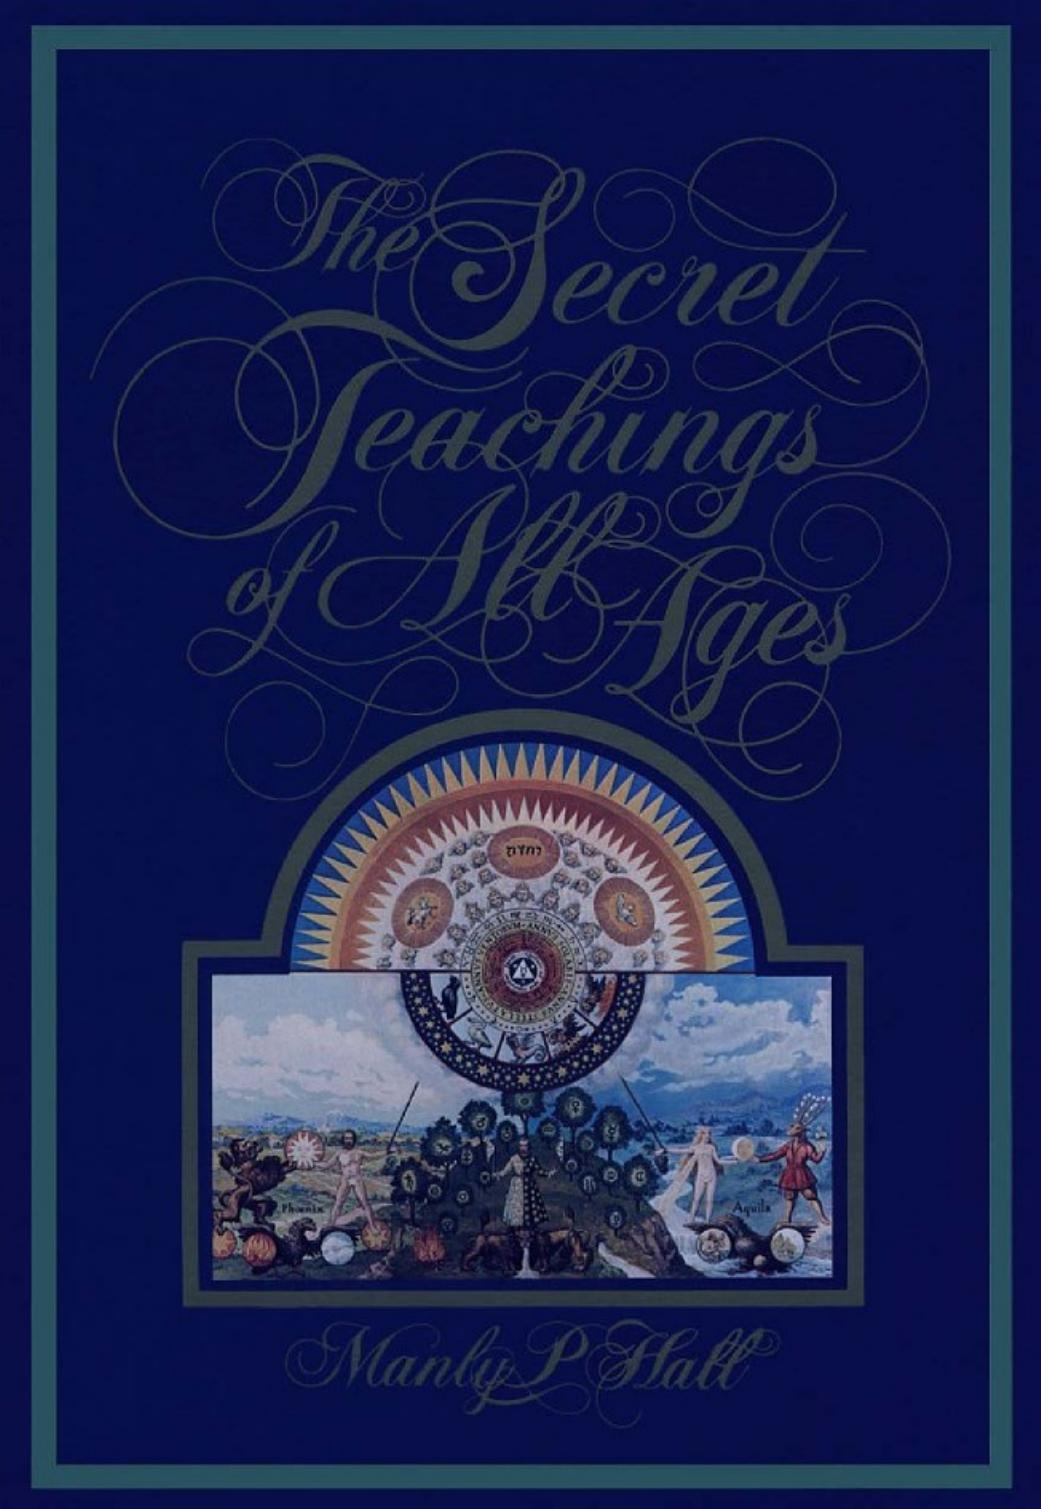 The Secret Teachings of All Ages: An Encyclopedic Outline of Masonic, Hermetic, Qabbalistic, and Rosicrucian Symbolical Philosophy : Being an Interpretation of the Secret Teachings Concealed Within the Rituals, Allegeries, and Mysteries of All Ages